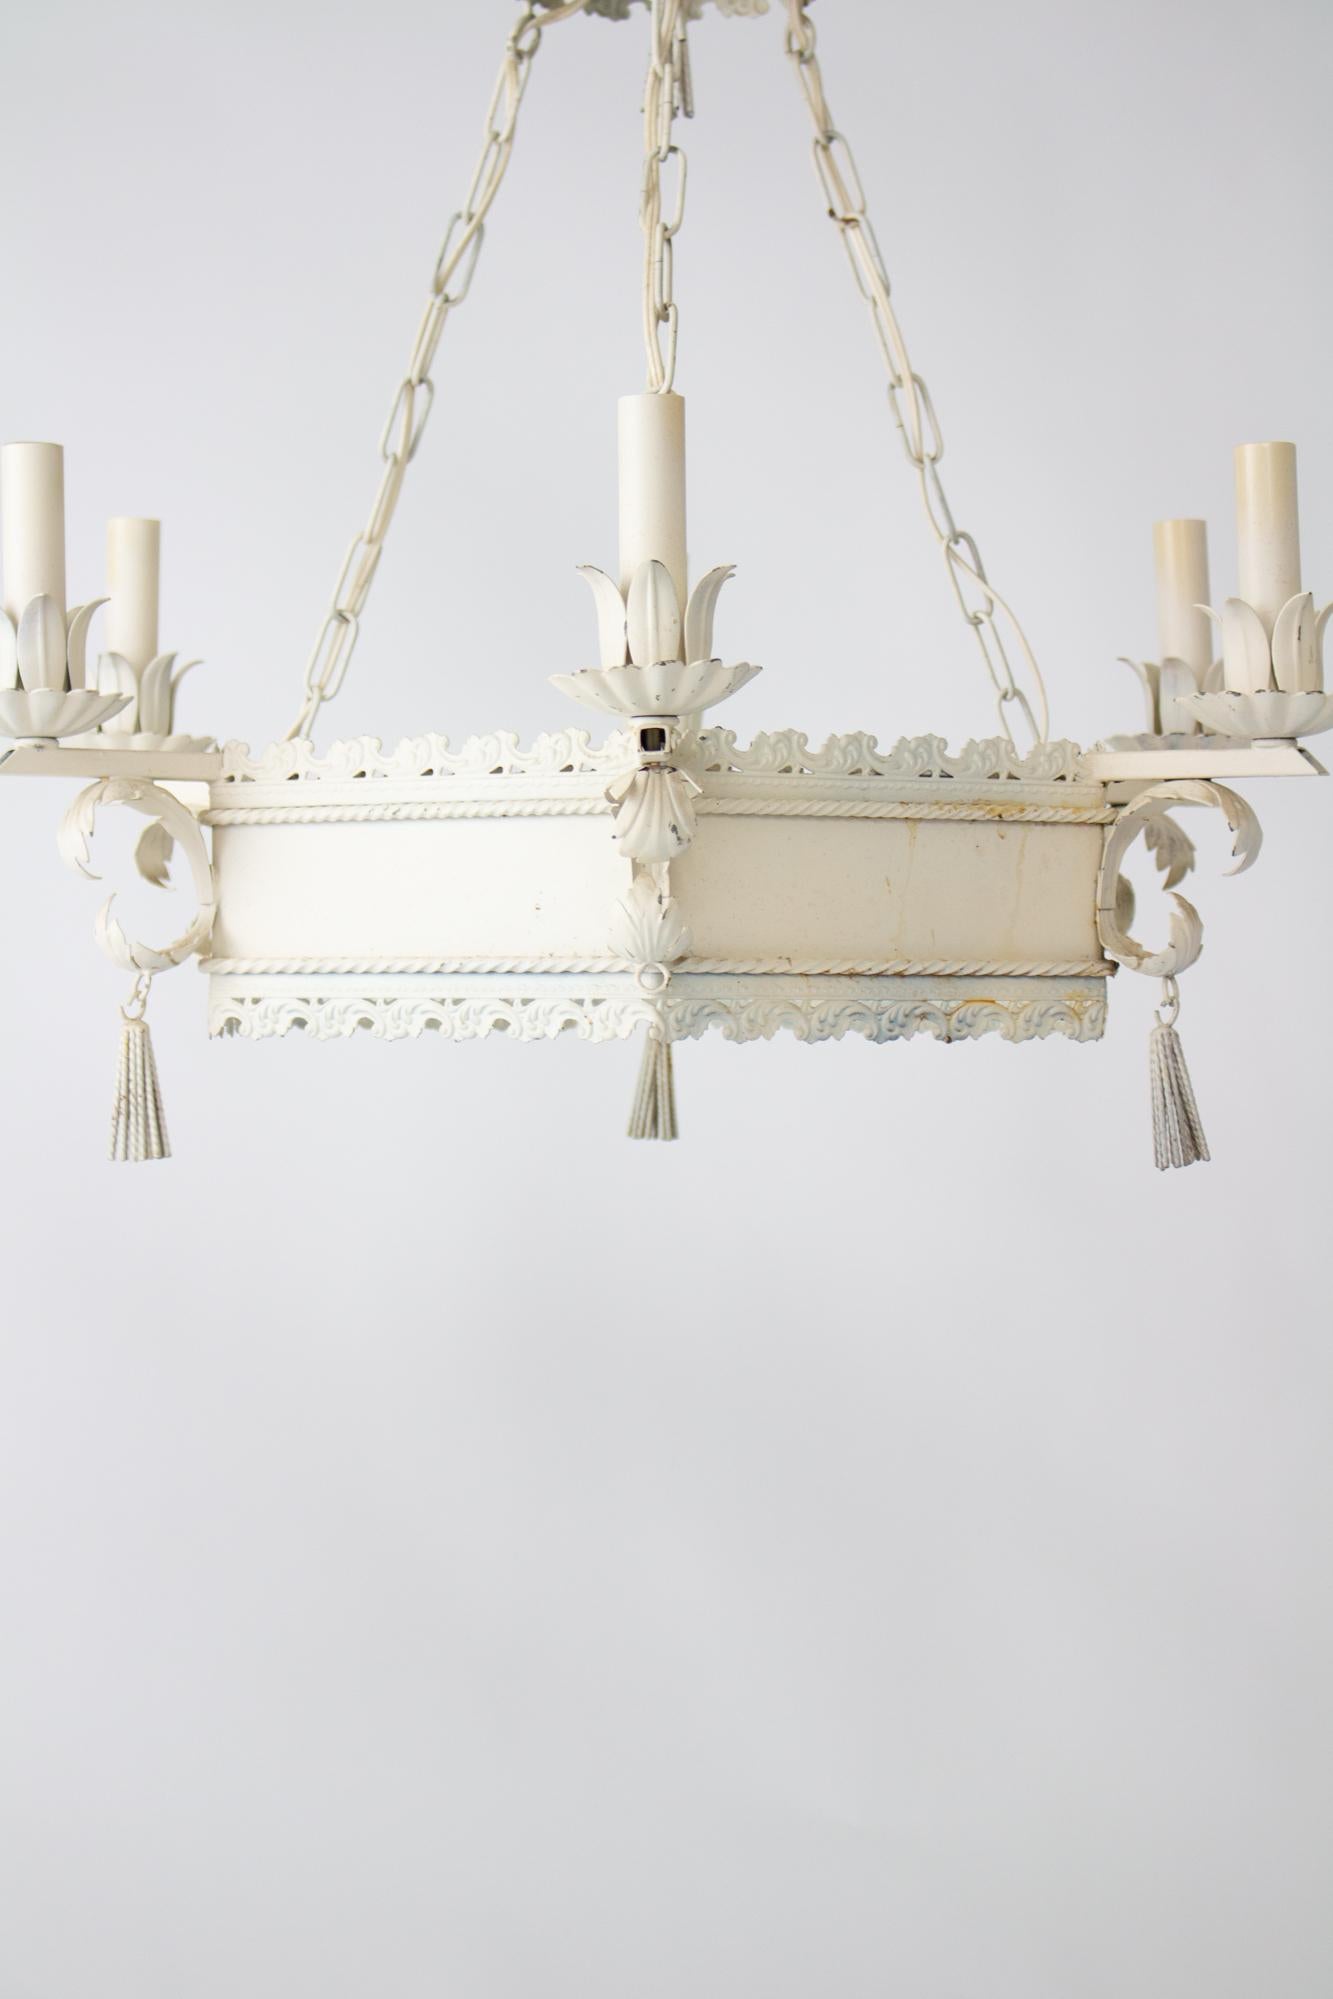 Painted Mid 20th Century White Tole Chandelier